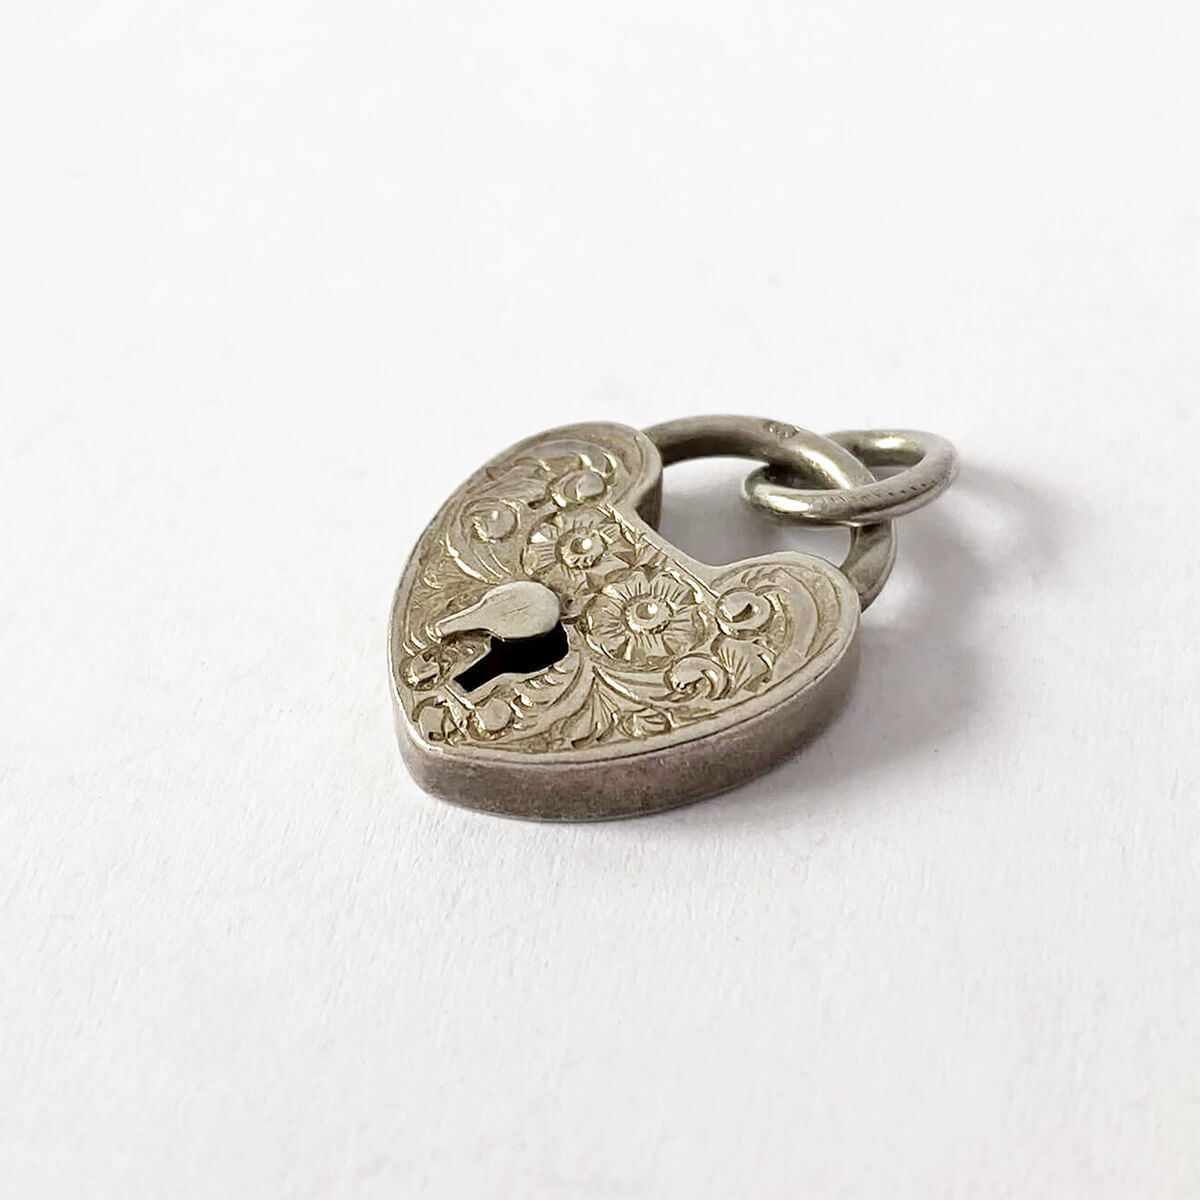 1900 Victorian sterling silver flowers heart shaped padlock charm